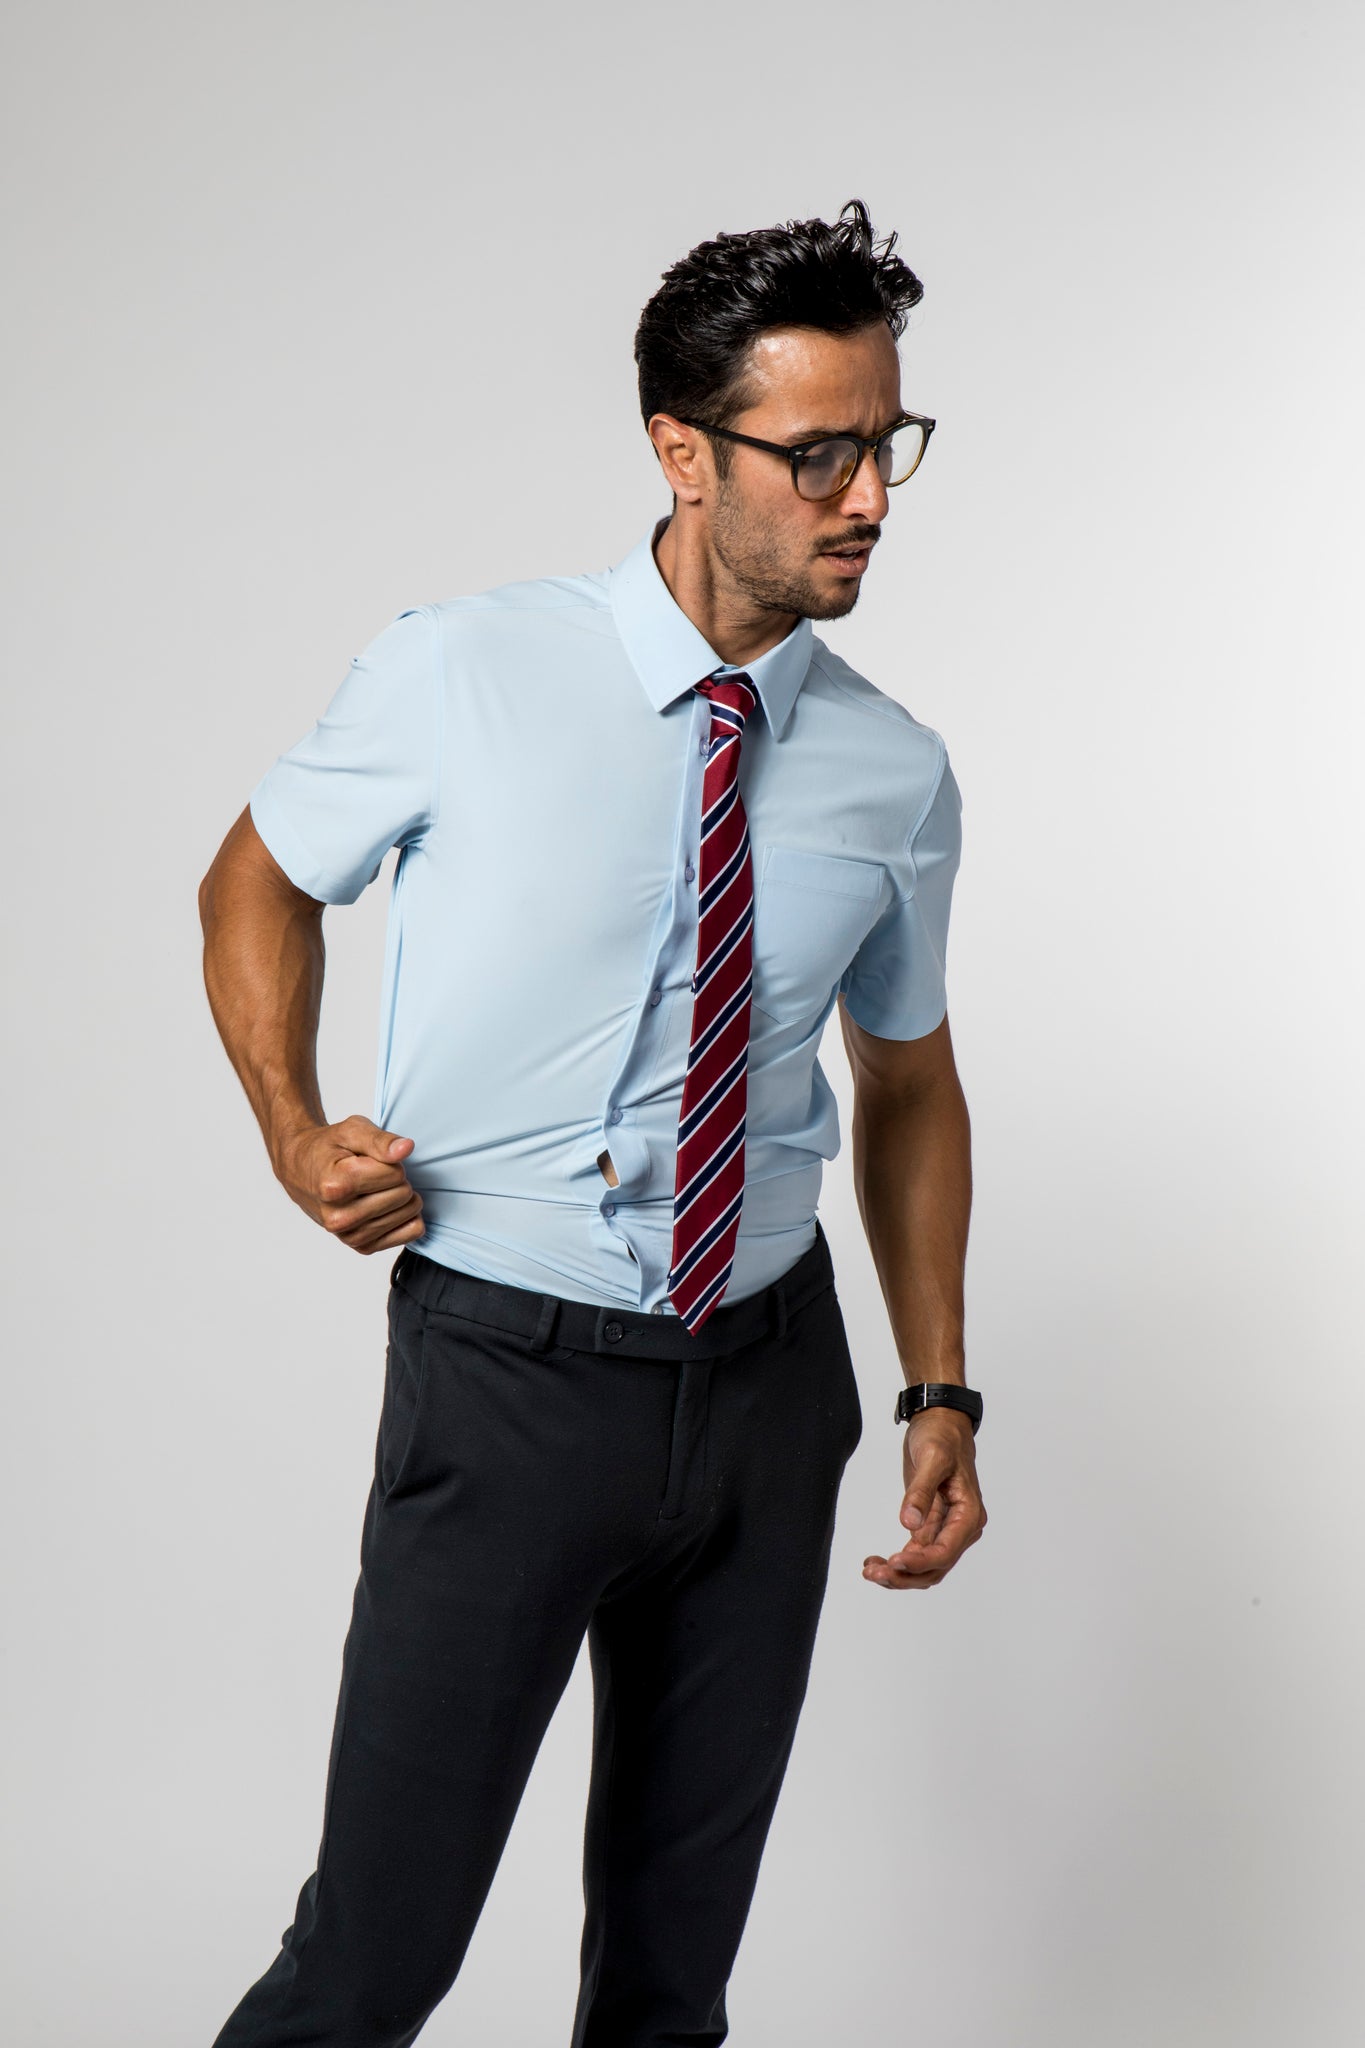 Stretch Business Shirts Are The New Normal